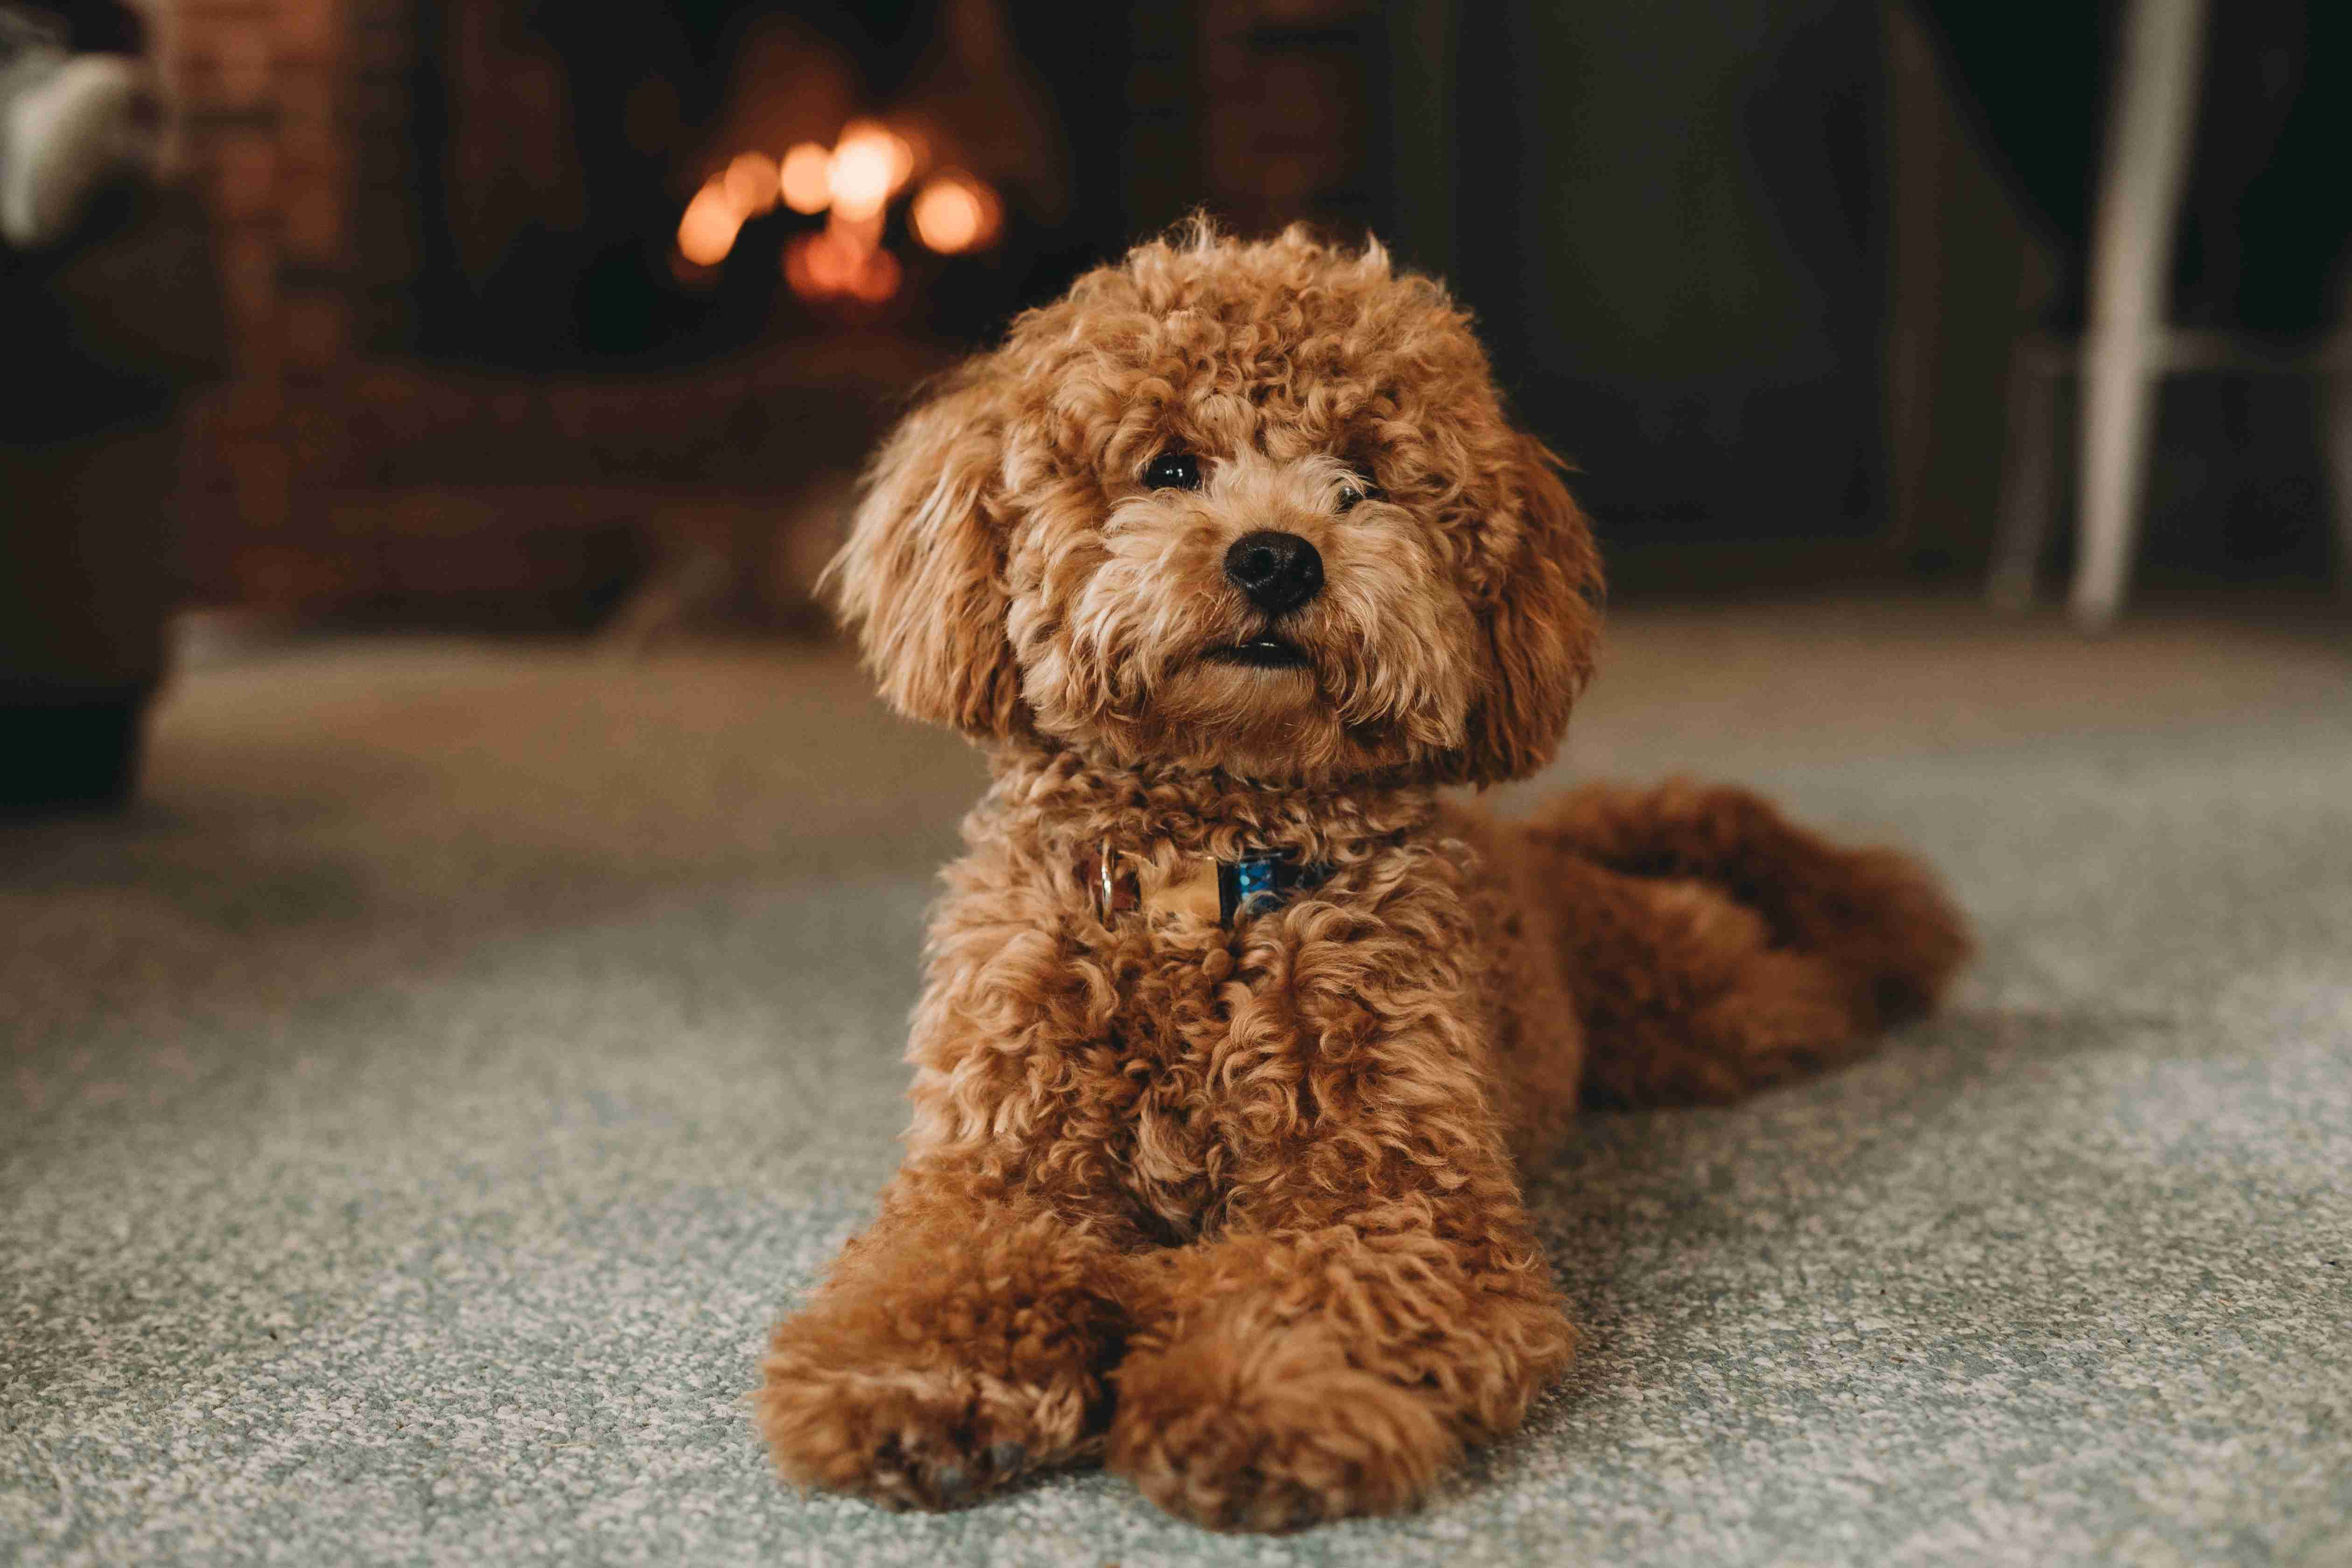 What are some common grooming needs and requirements for a Poodle puppy?